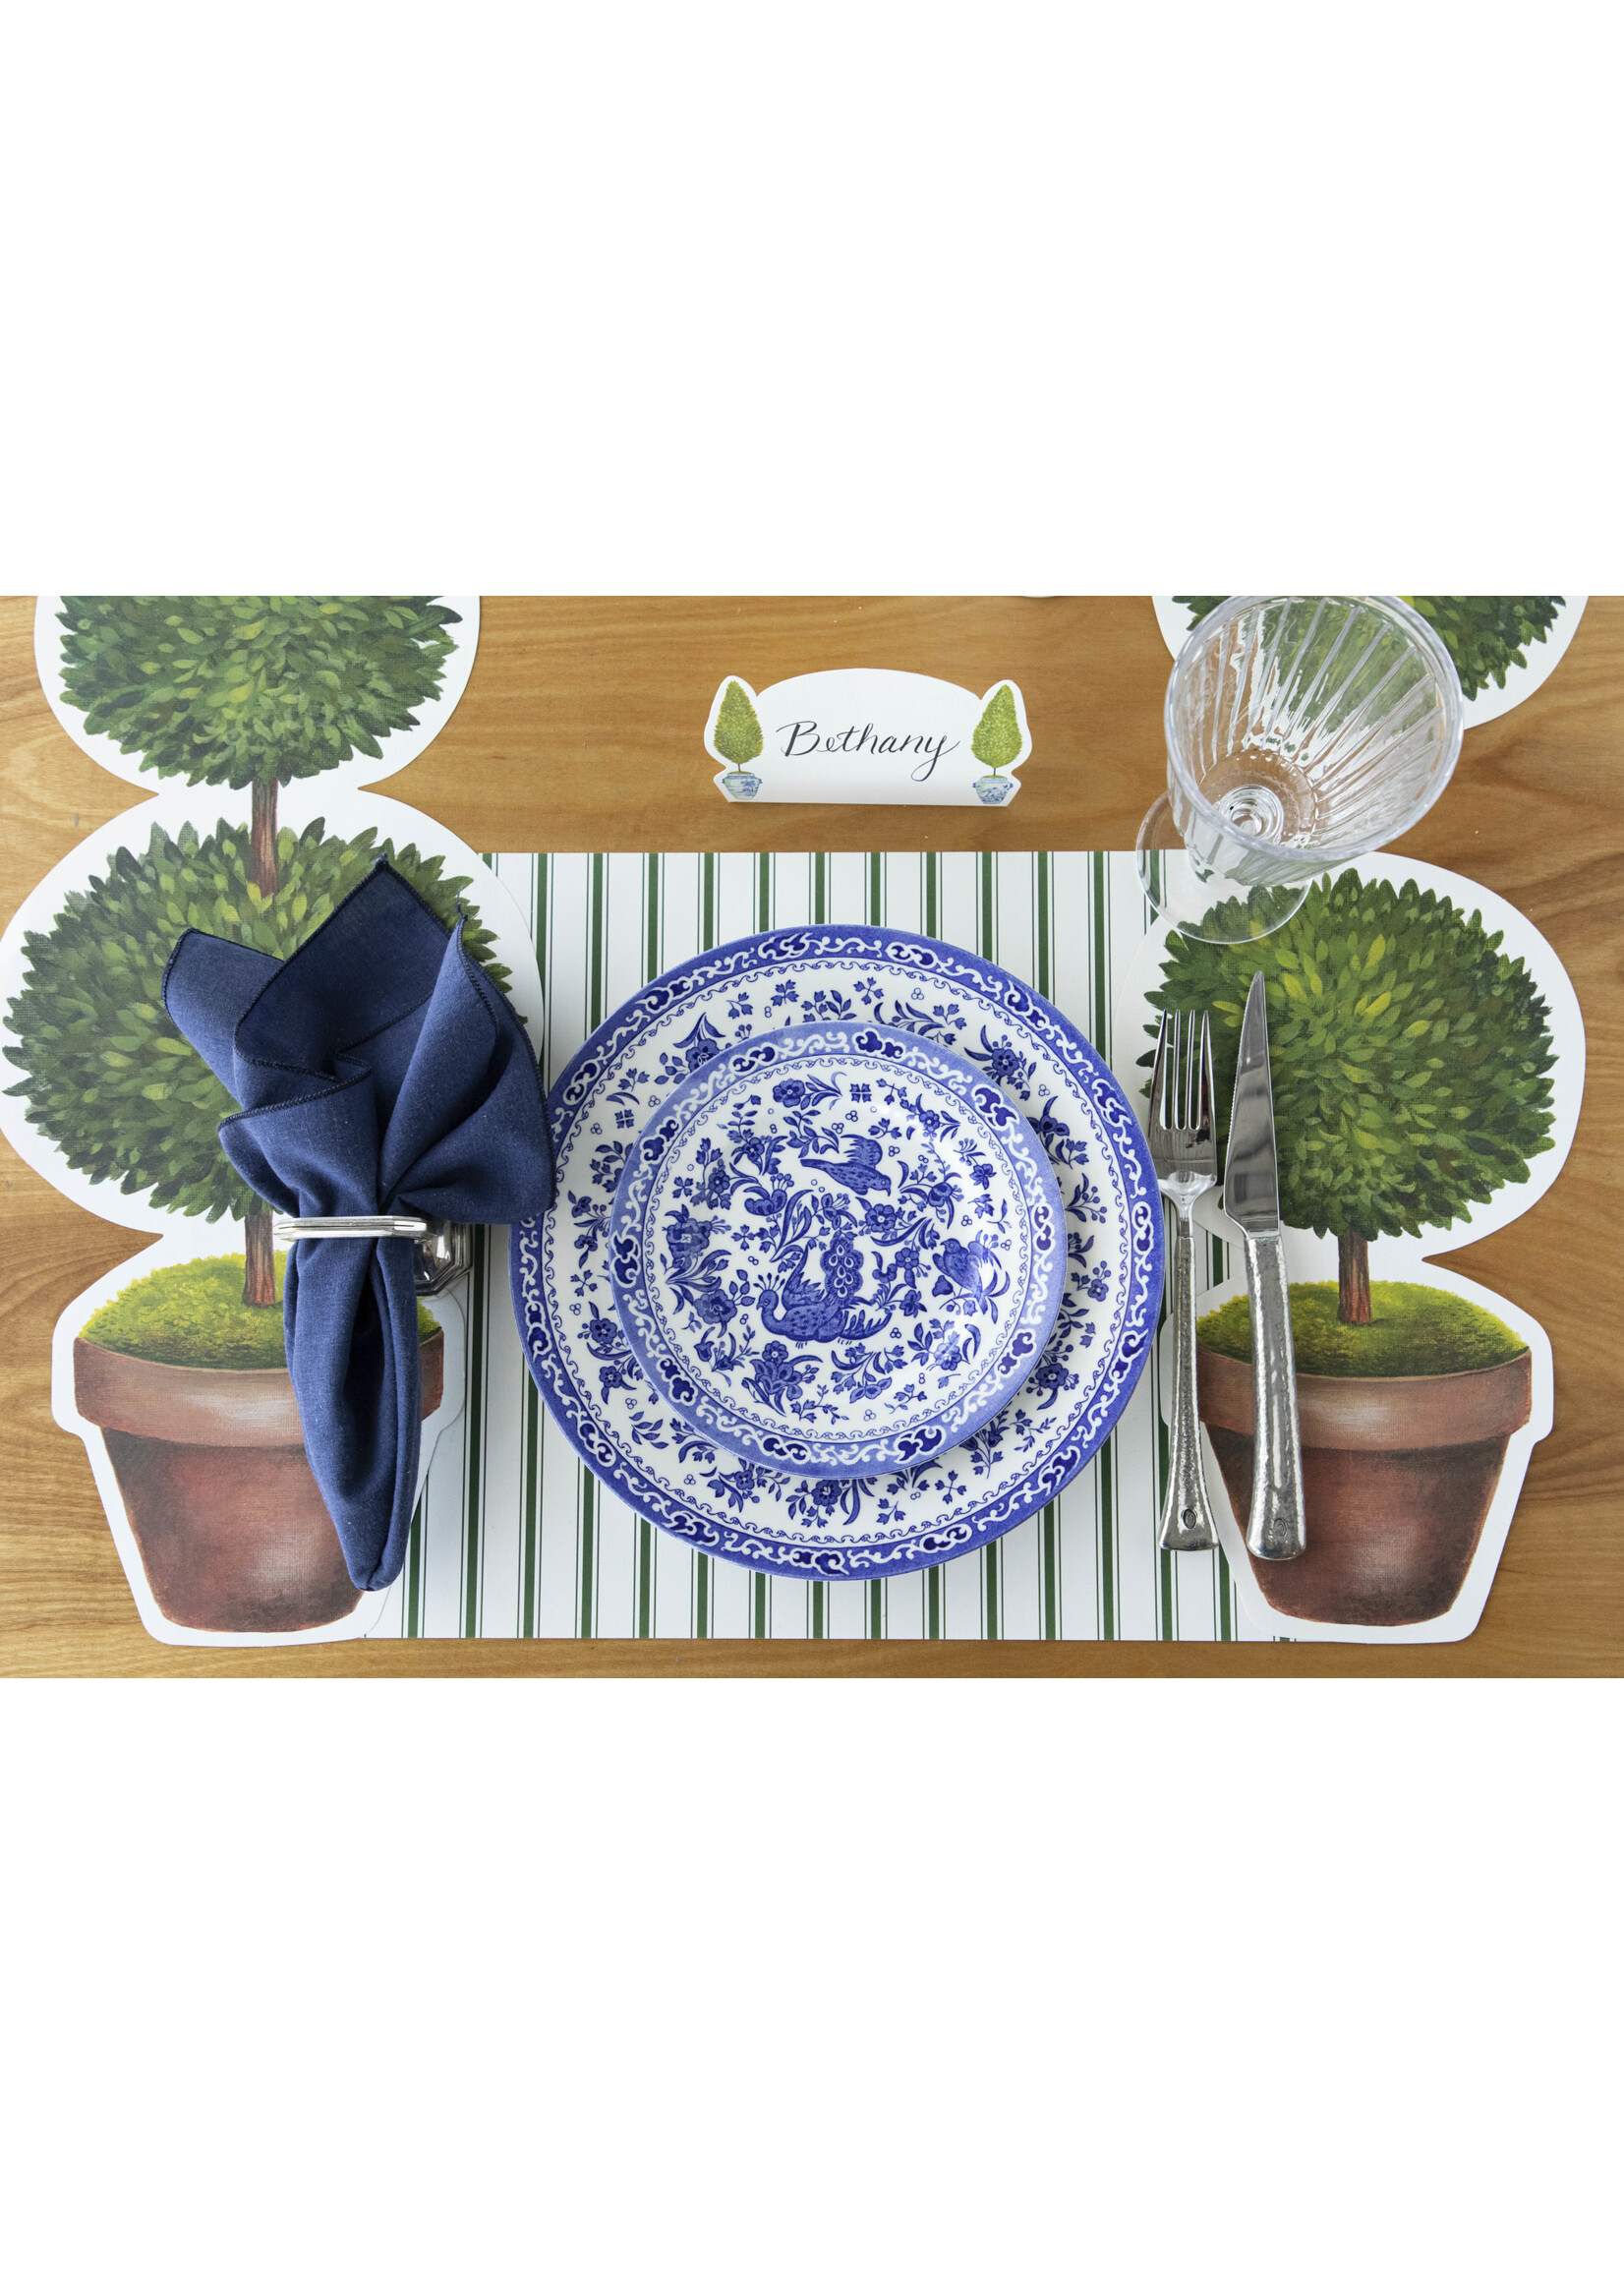 Hester & Cook Paper Placemats - Topiary Pair (12 sheets)